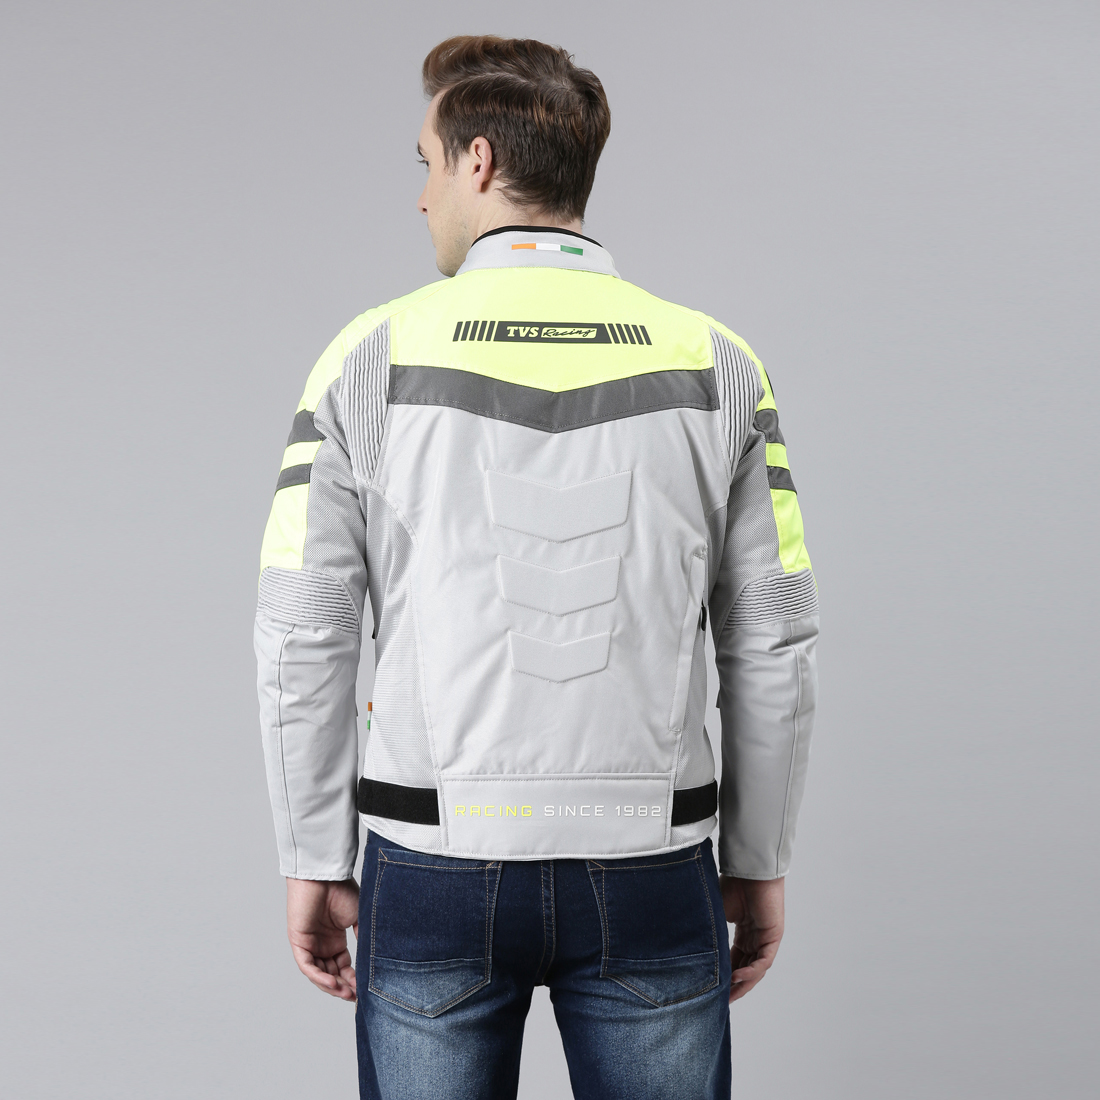 Tarmac One III Black/Green/Fluorescent Level 2 Riding Jacket with PU chest  protectors - Bachoo Motors